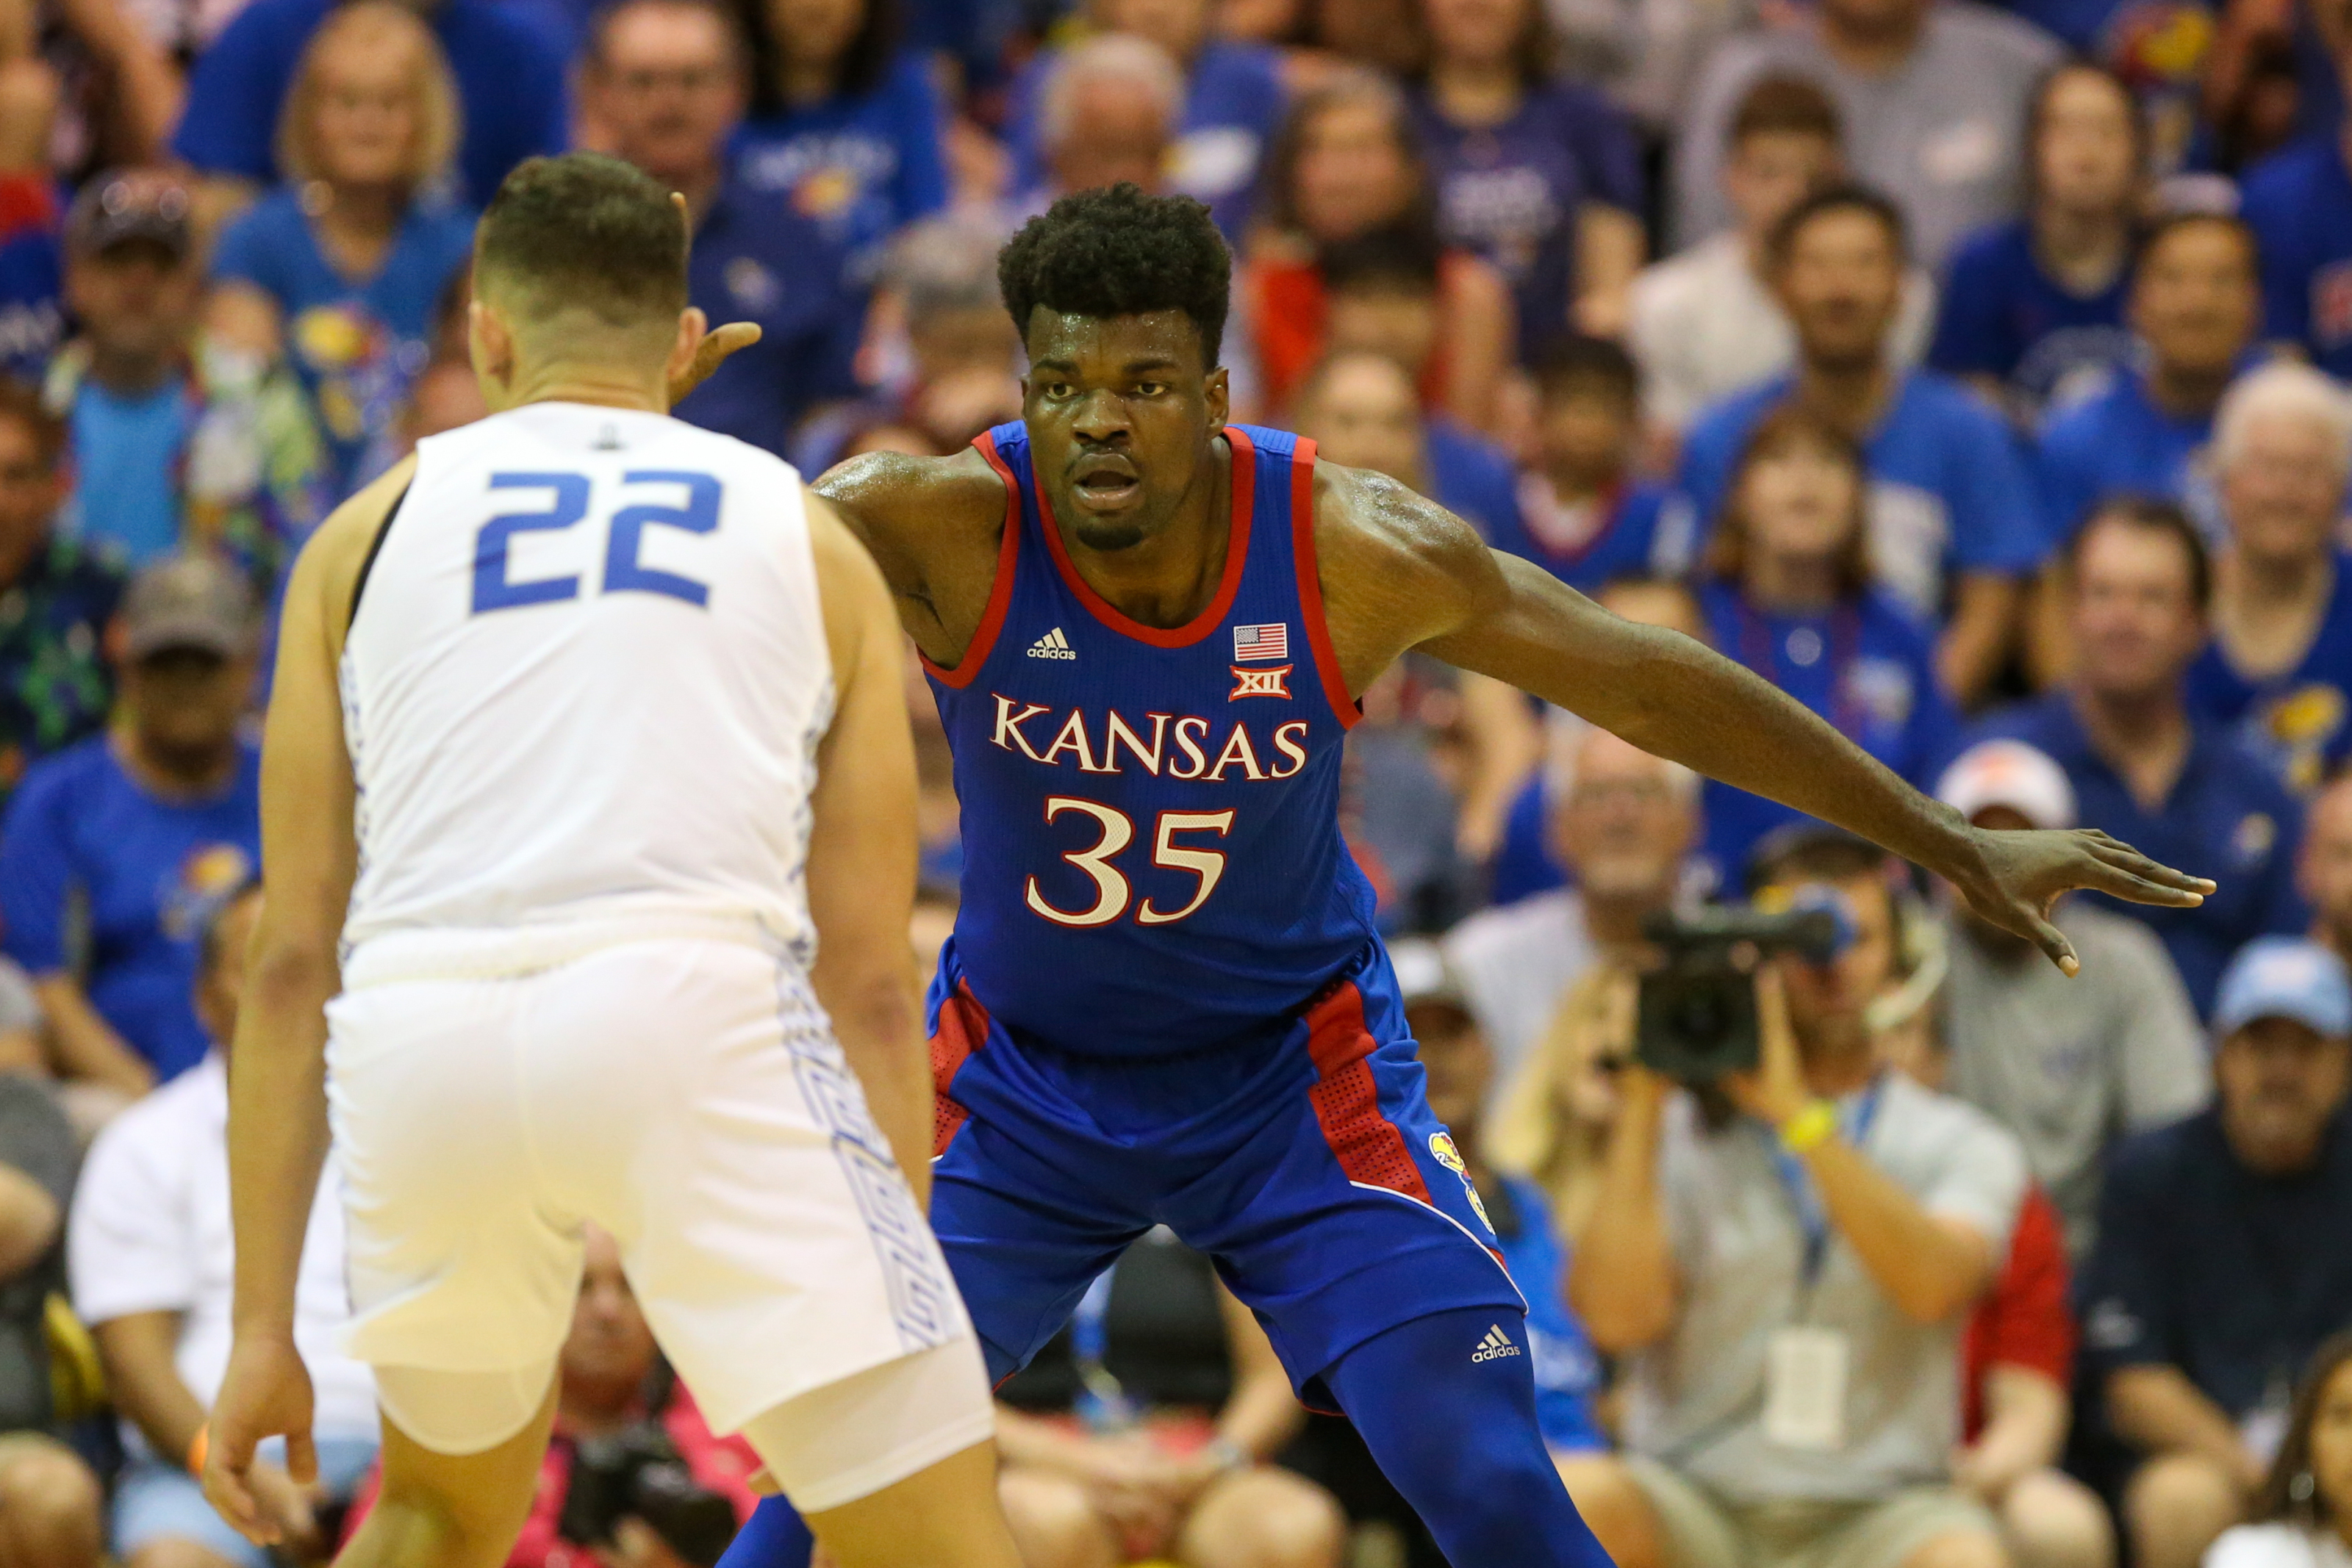 Kansas vs BYU 2019-20 college basketball game preview, TV schedule